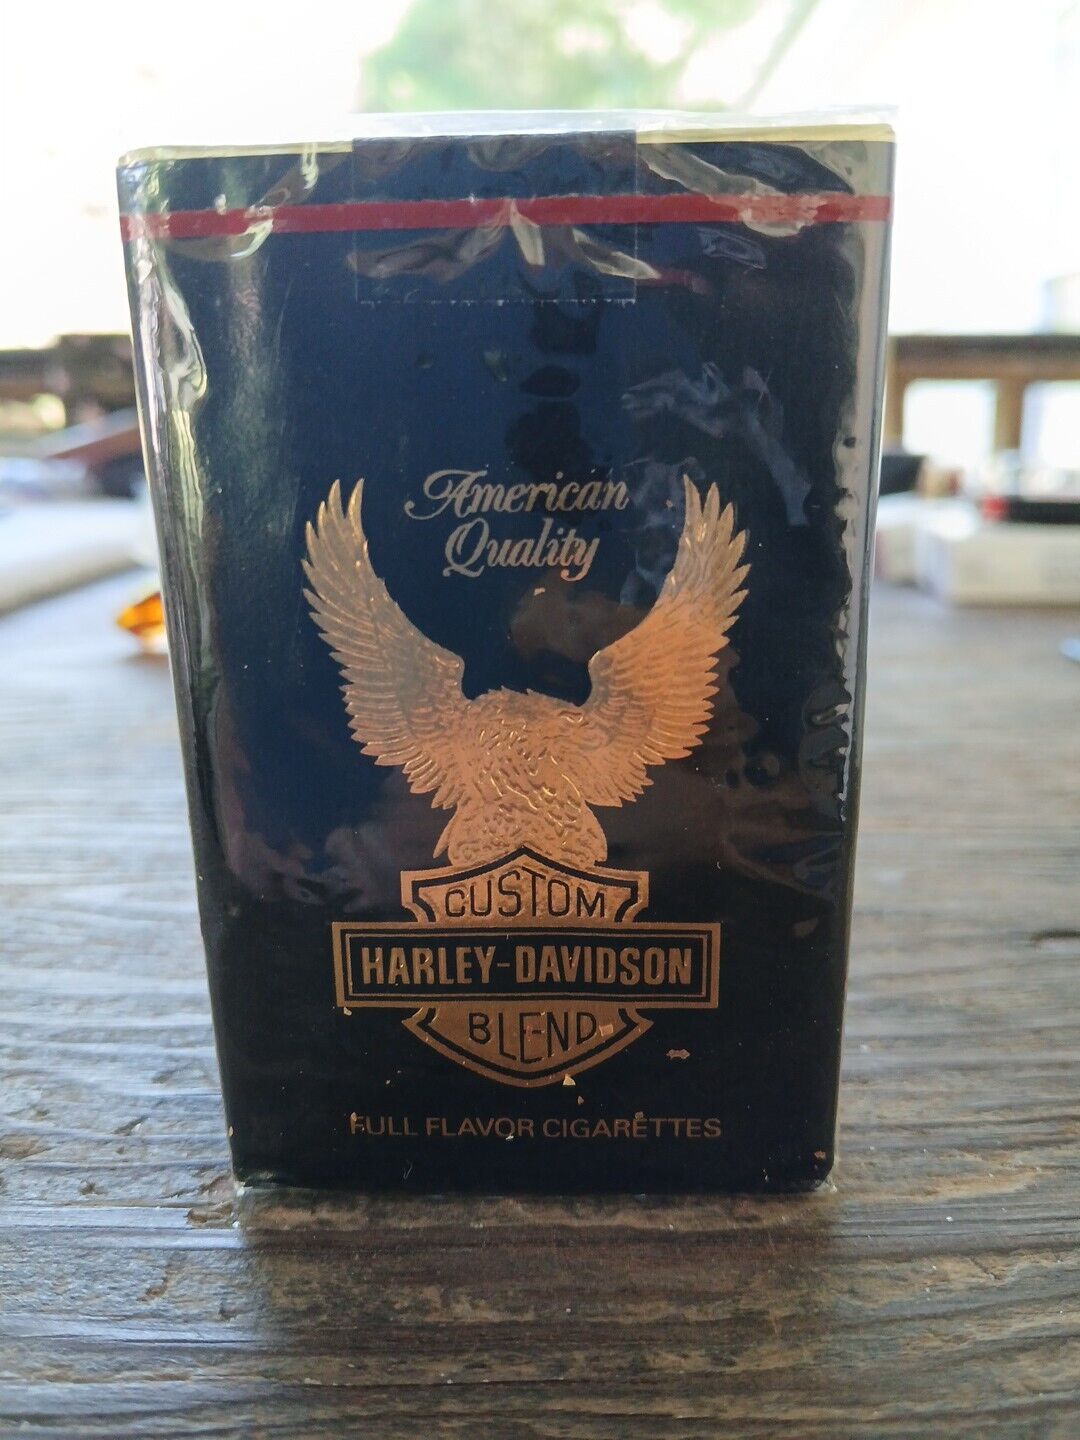 Rare Vintage Pack Of Harley Davidson Cigarettes Very Collectible